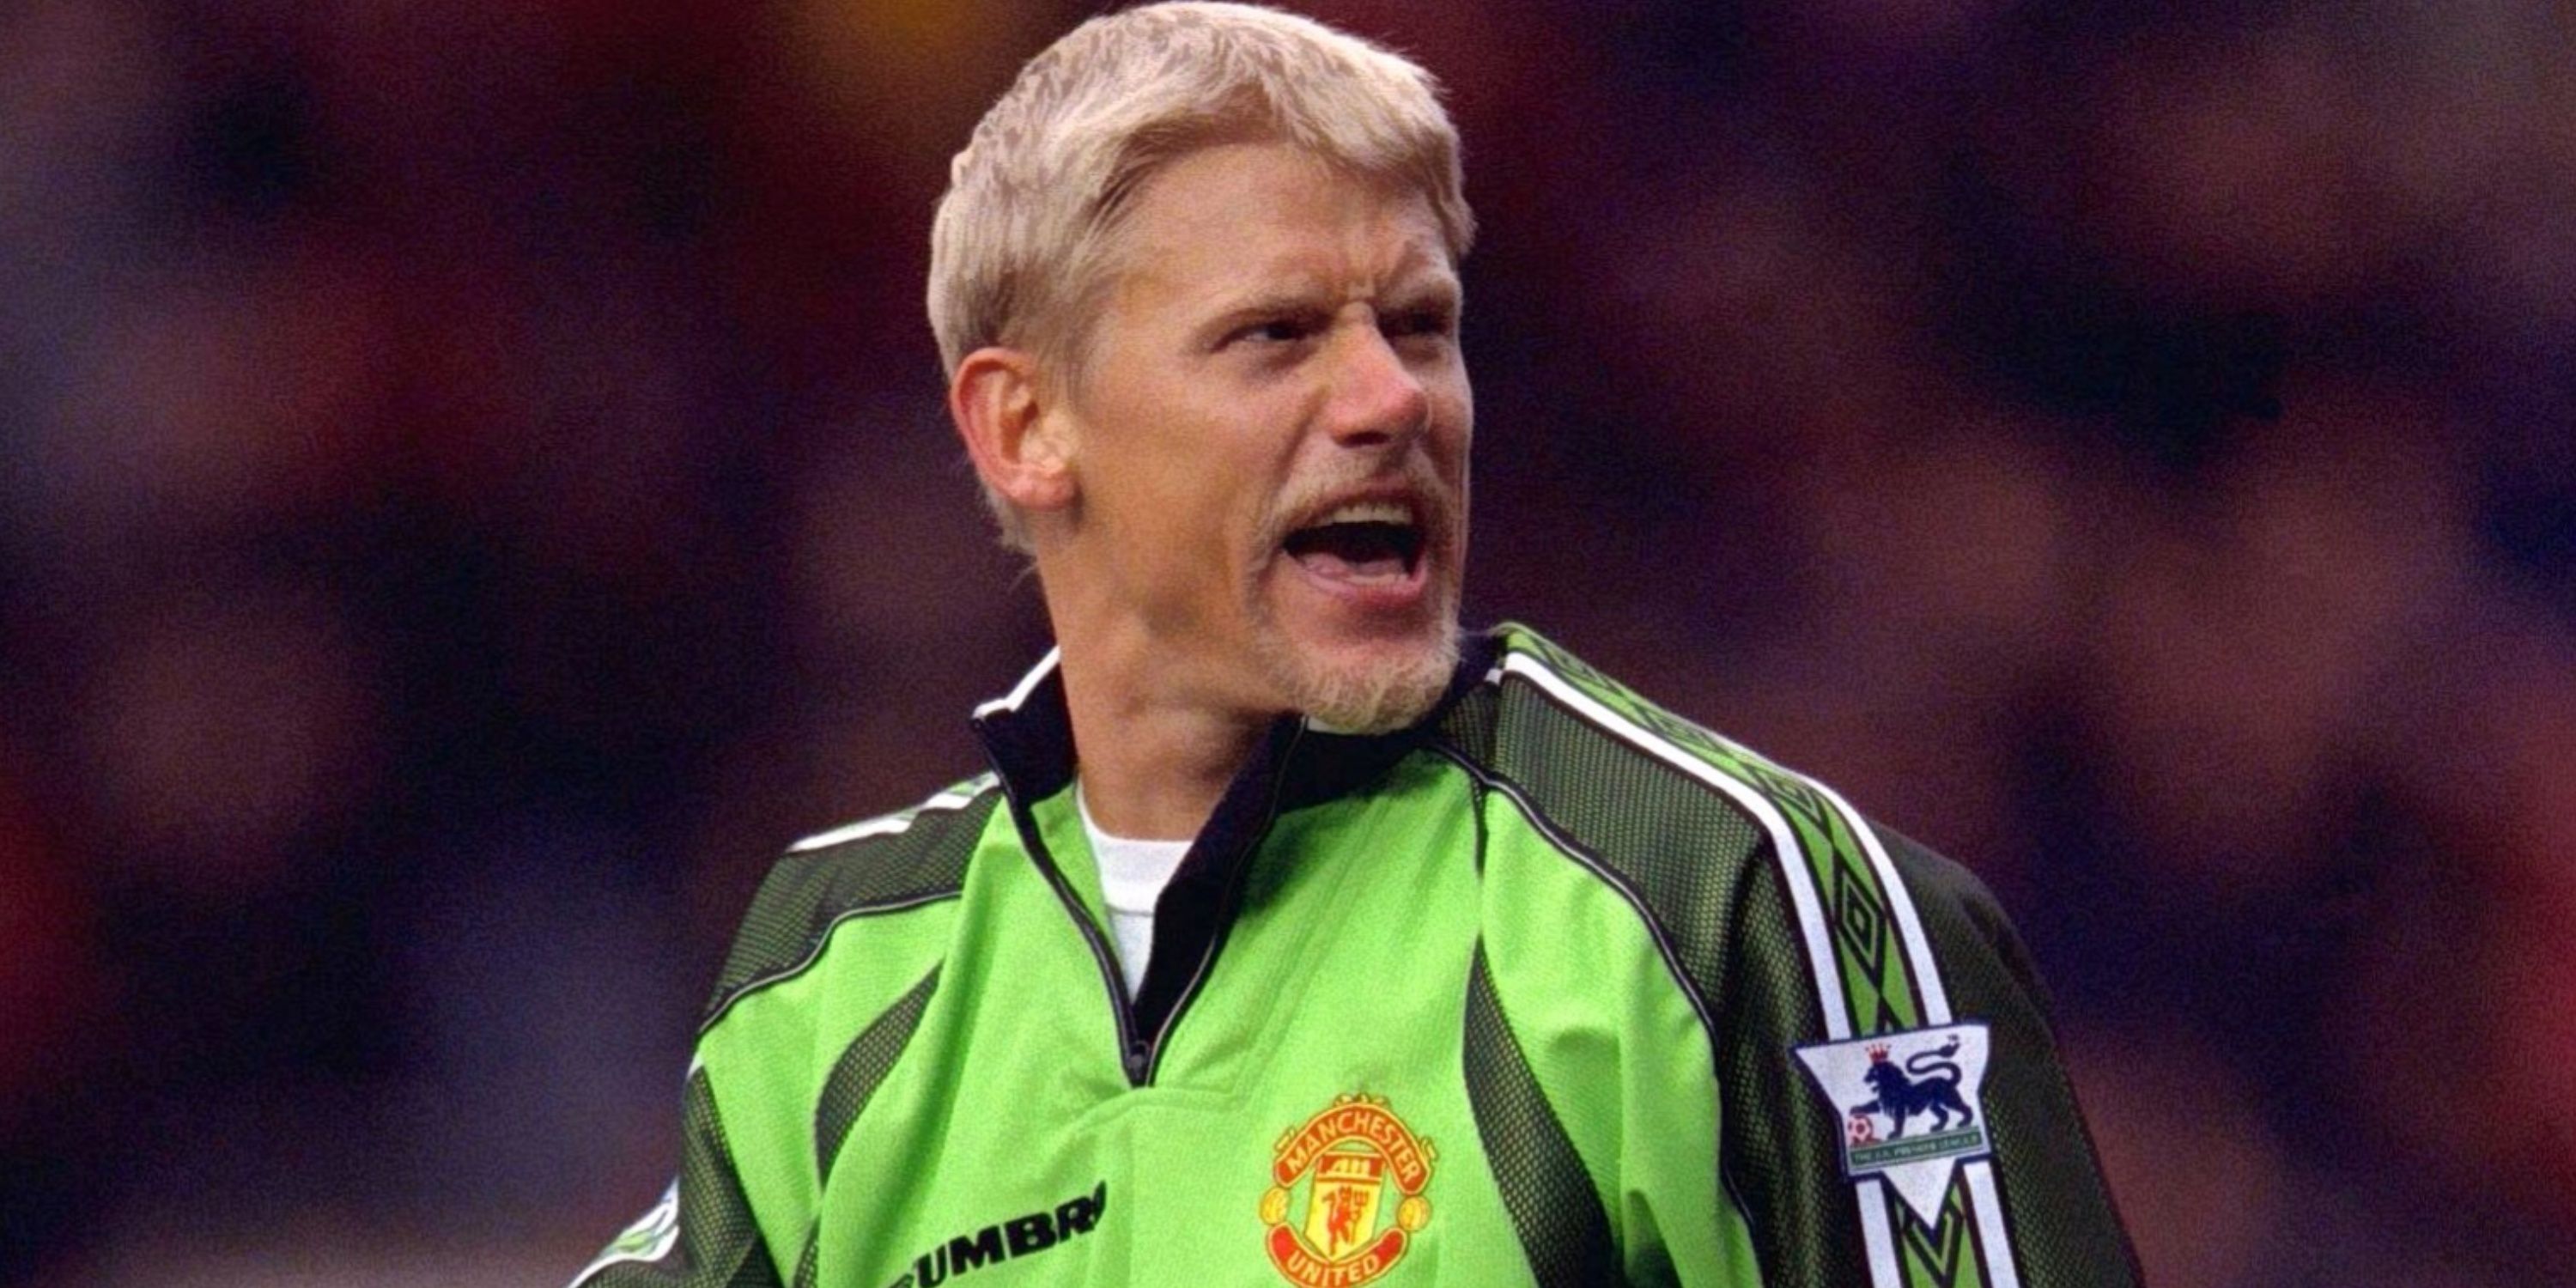 Peter Schmeichel in action for Manchester United